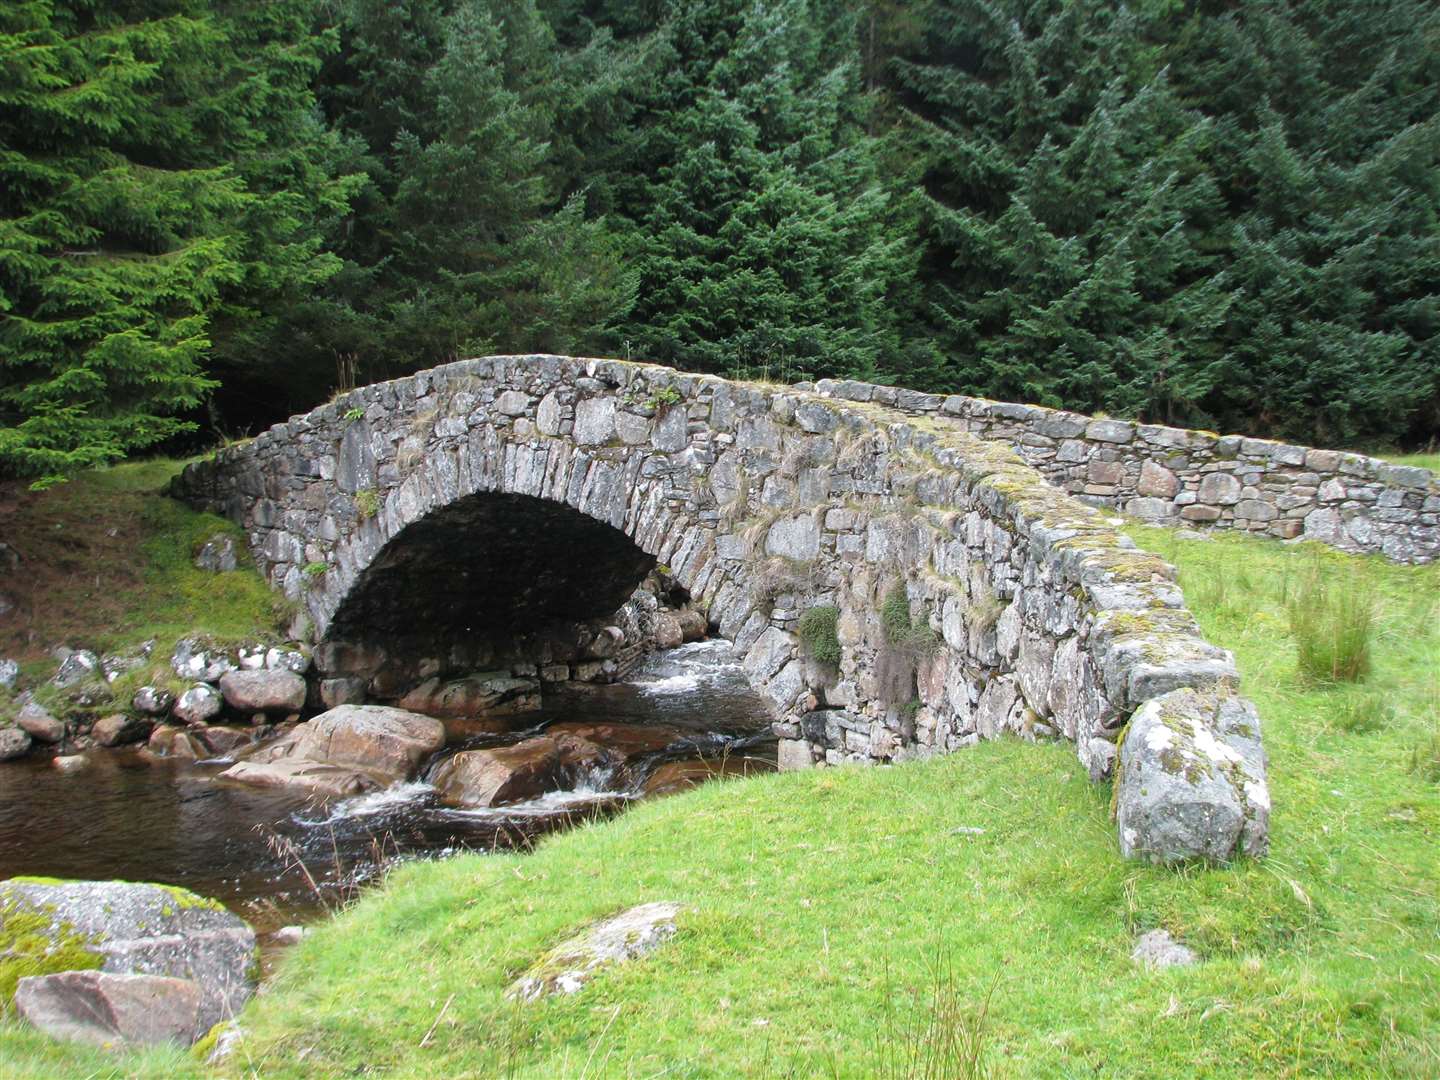 Melgarve East Bridge on General Wade's Military Road over the Corrieyairack Pass.